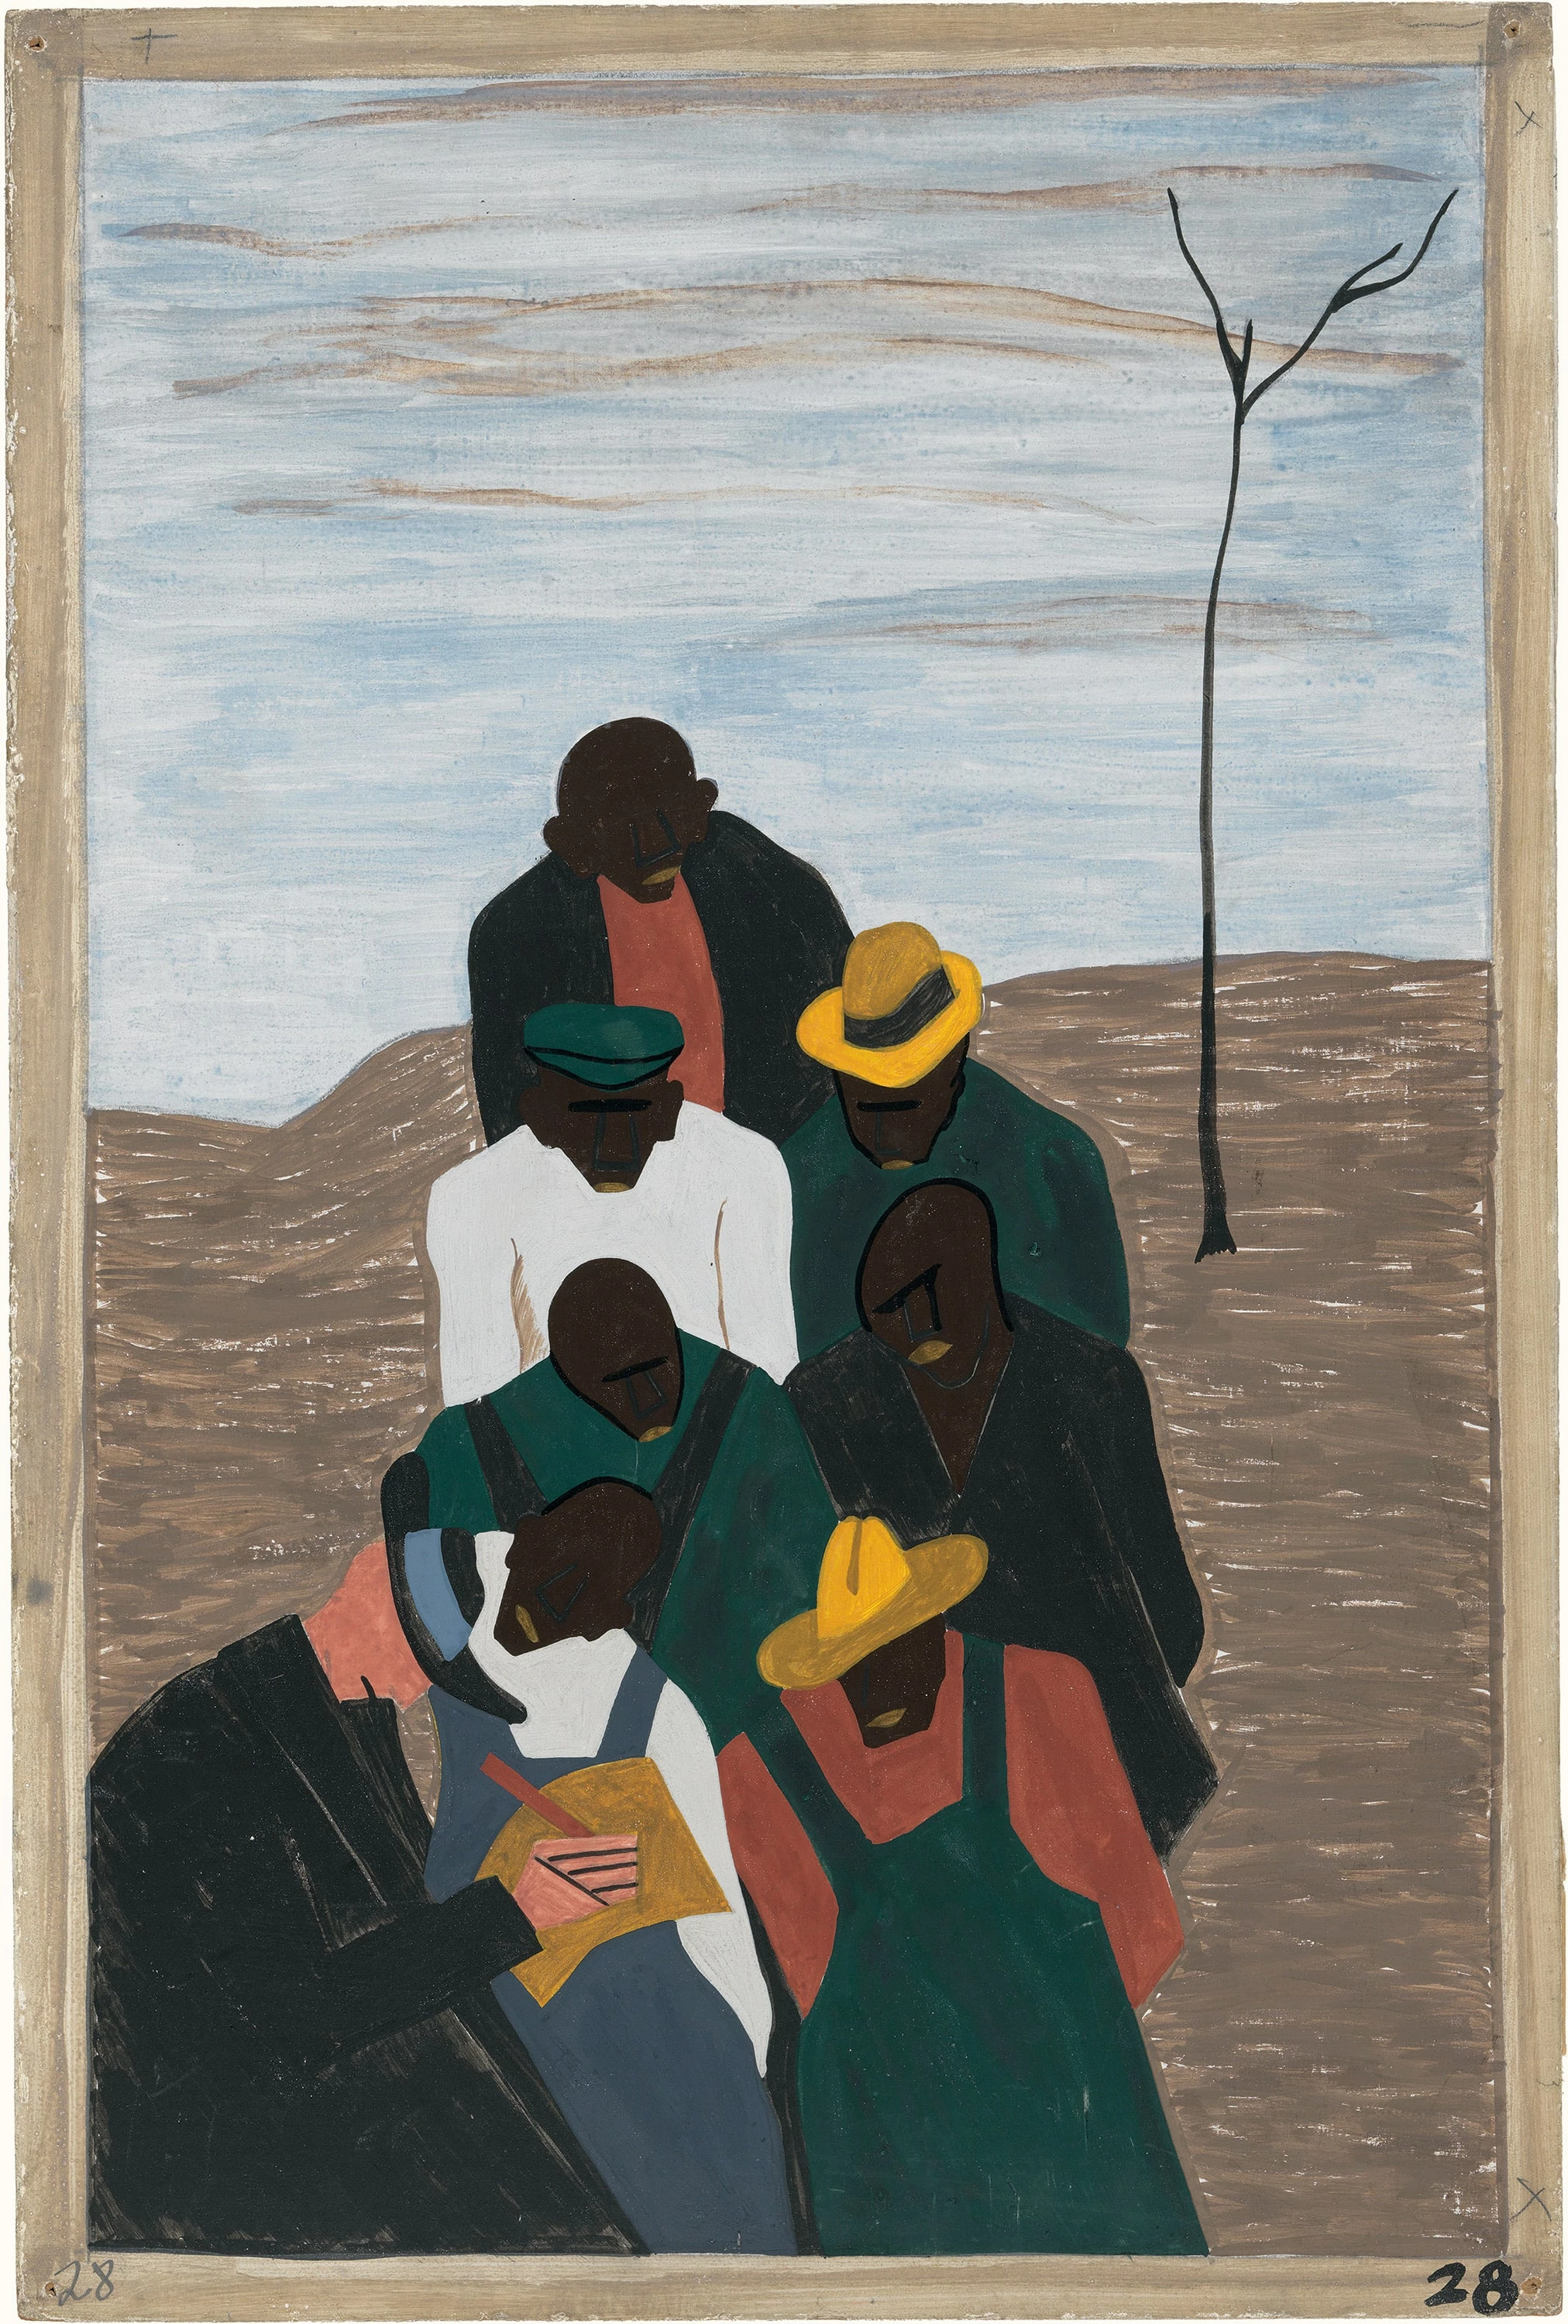 Migration Series No.28: The labor agent sent south by northern industry was a familiar presence in the Black communities, Jacob Lawrence